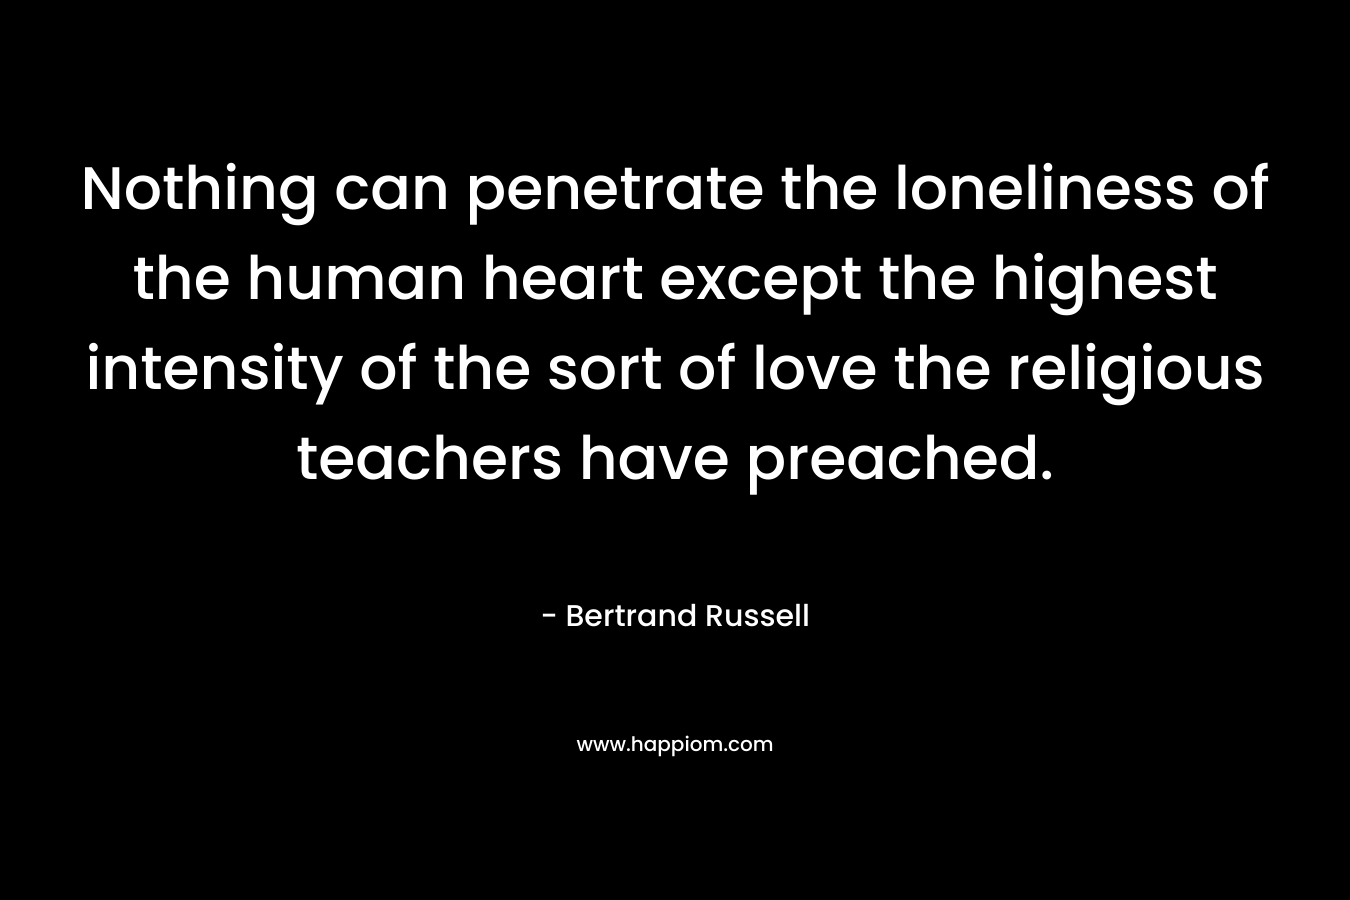 Nothing can penetrate the loneliness of the human heart except the highest intensity of the sort of love the religious teachers have preached. – Bertrand Russell